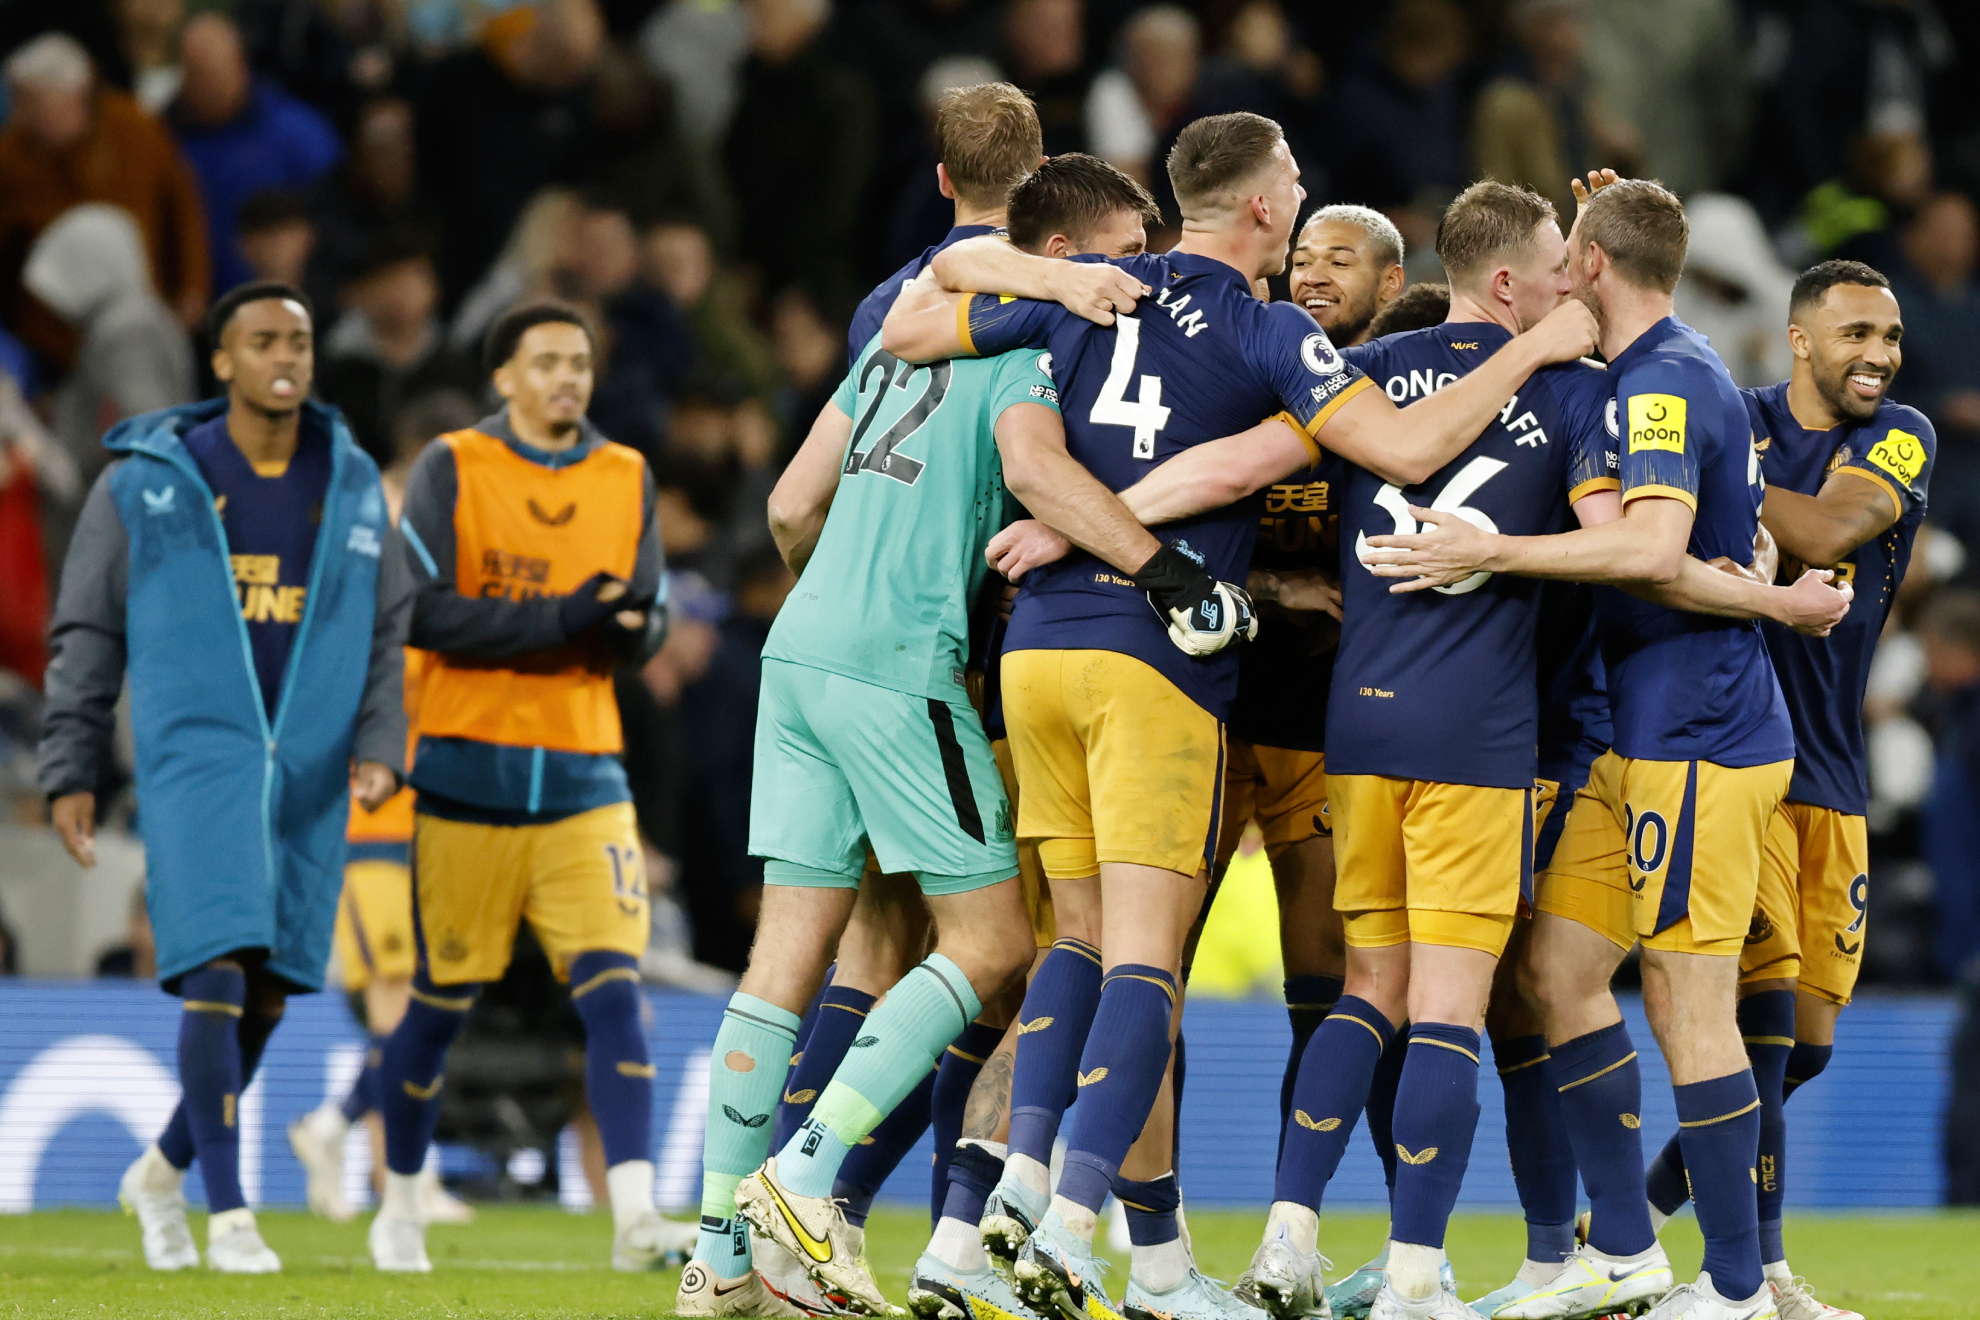 Players of Newcastle celebrate after winning the Premier League soccer match between Tottenham and Newcastle.